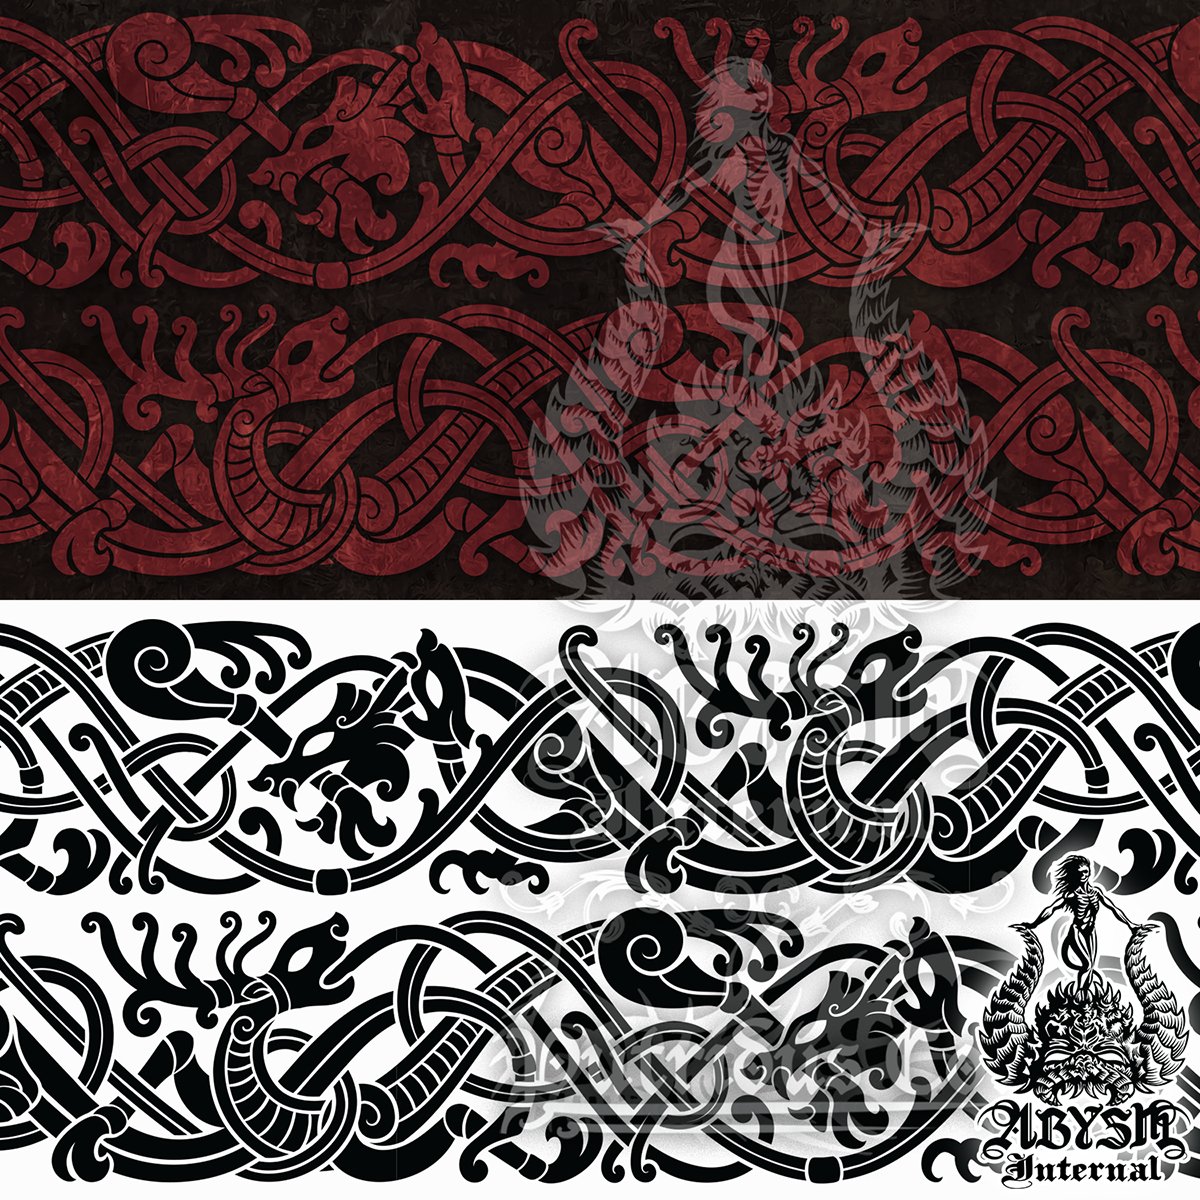 Personalized Viking Seamless Patterns, custom celtic, norse or ancient Knotwork art for fabric or merch - Abysm Internal